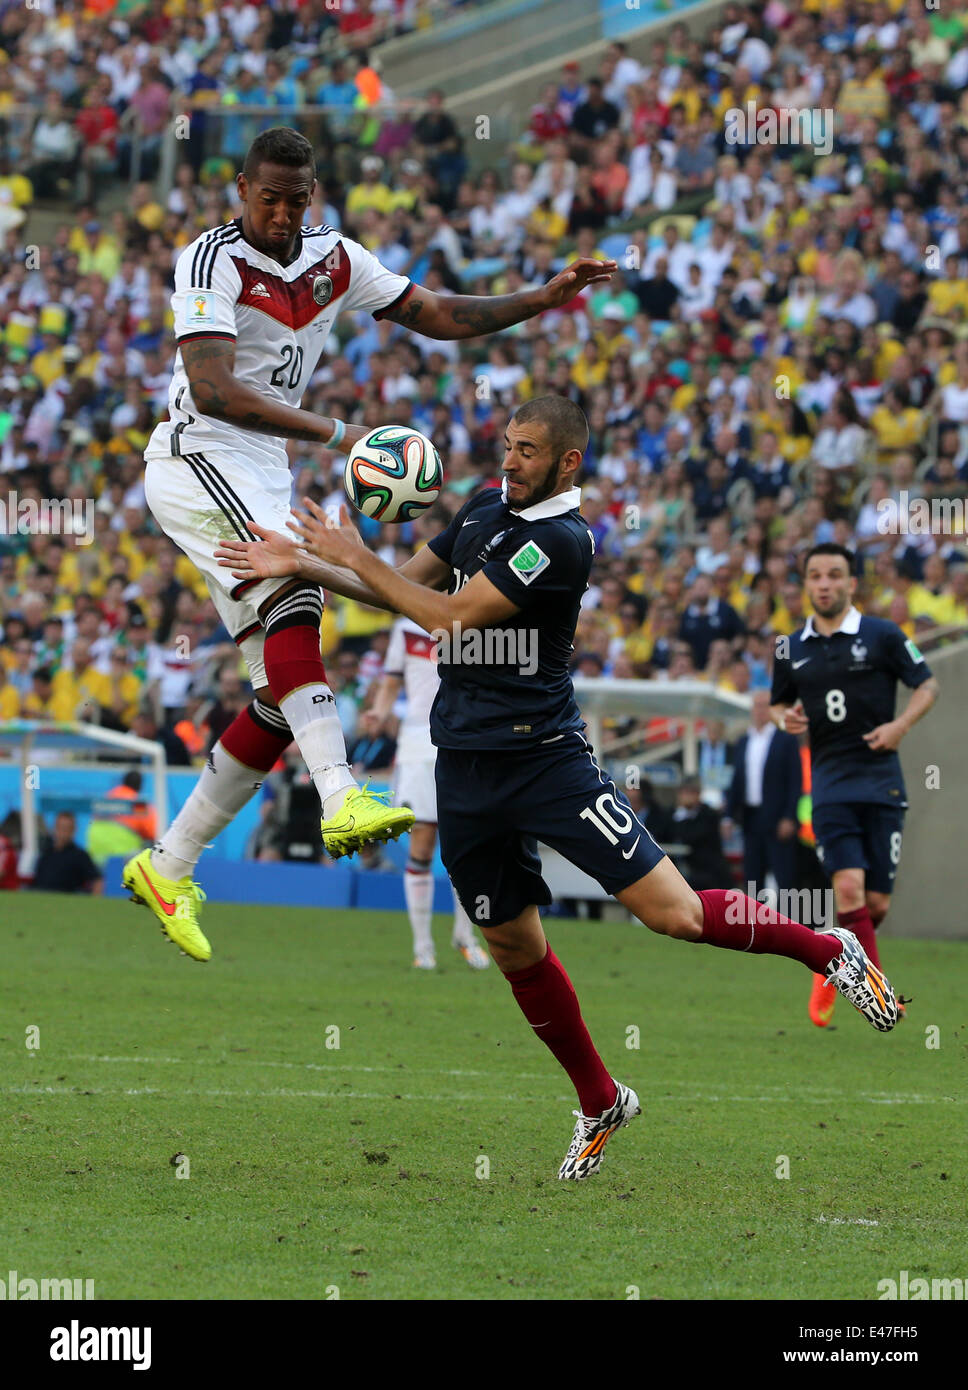 Rio De Janerio, Brazil. 04th July, 2014. FIFA World Cup 2014 quarter final soccer match between France and Germany at Estadio do Maracana in Rio de Janeiro, Brazil. Boateng wins the header over Benzema Credit:  Action Plus Sports/Alamy Live News Stock Photo